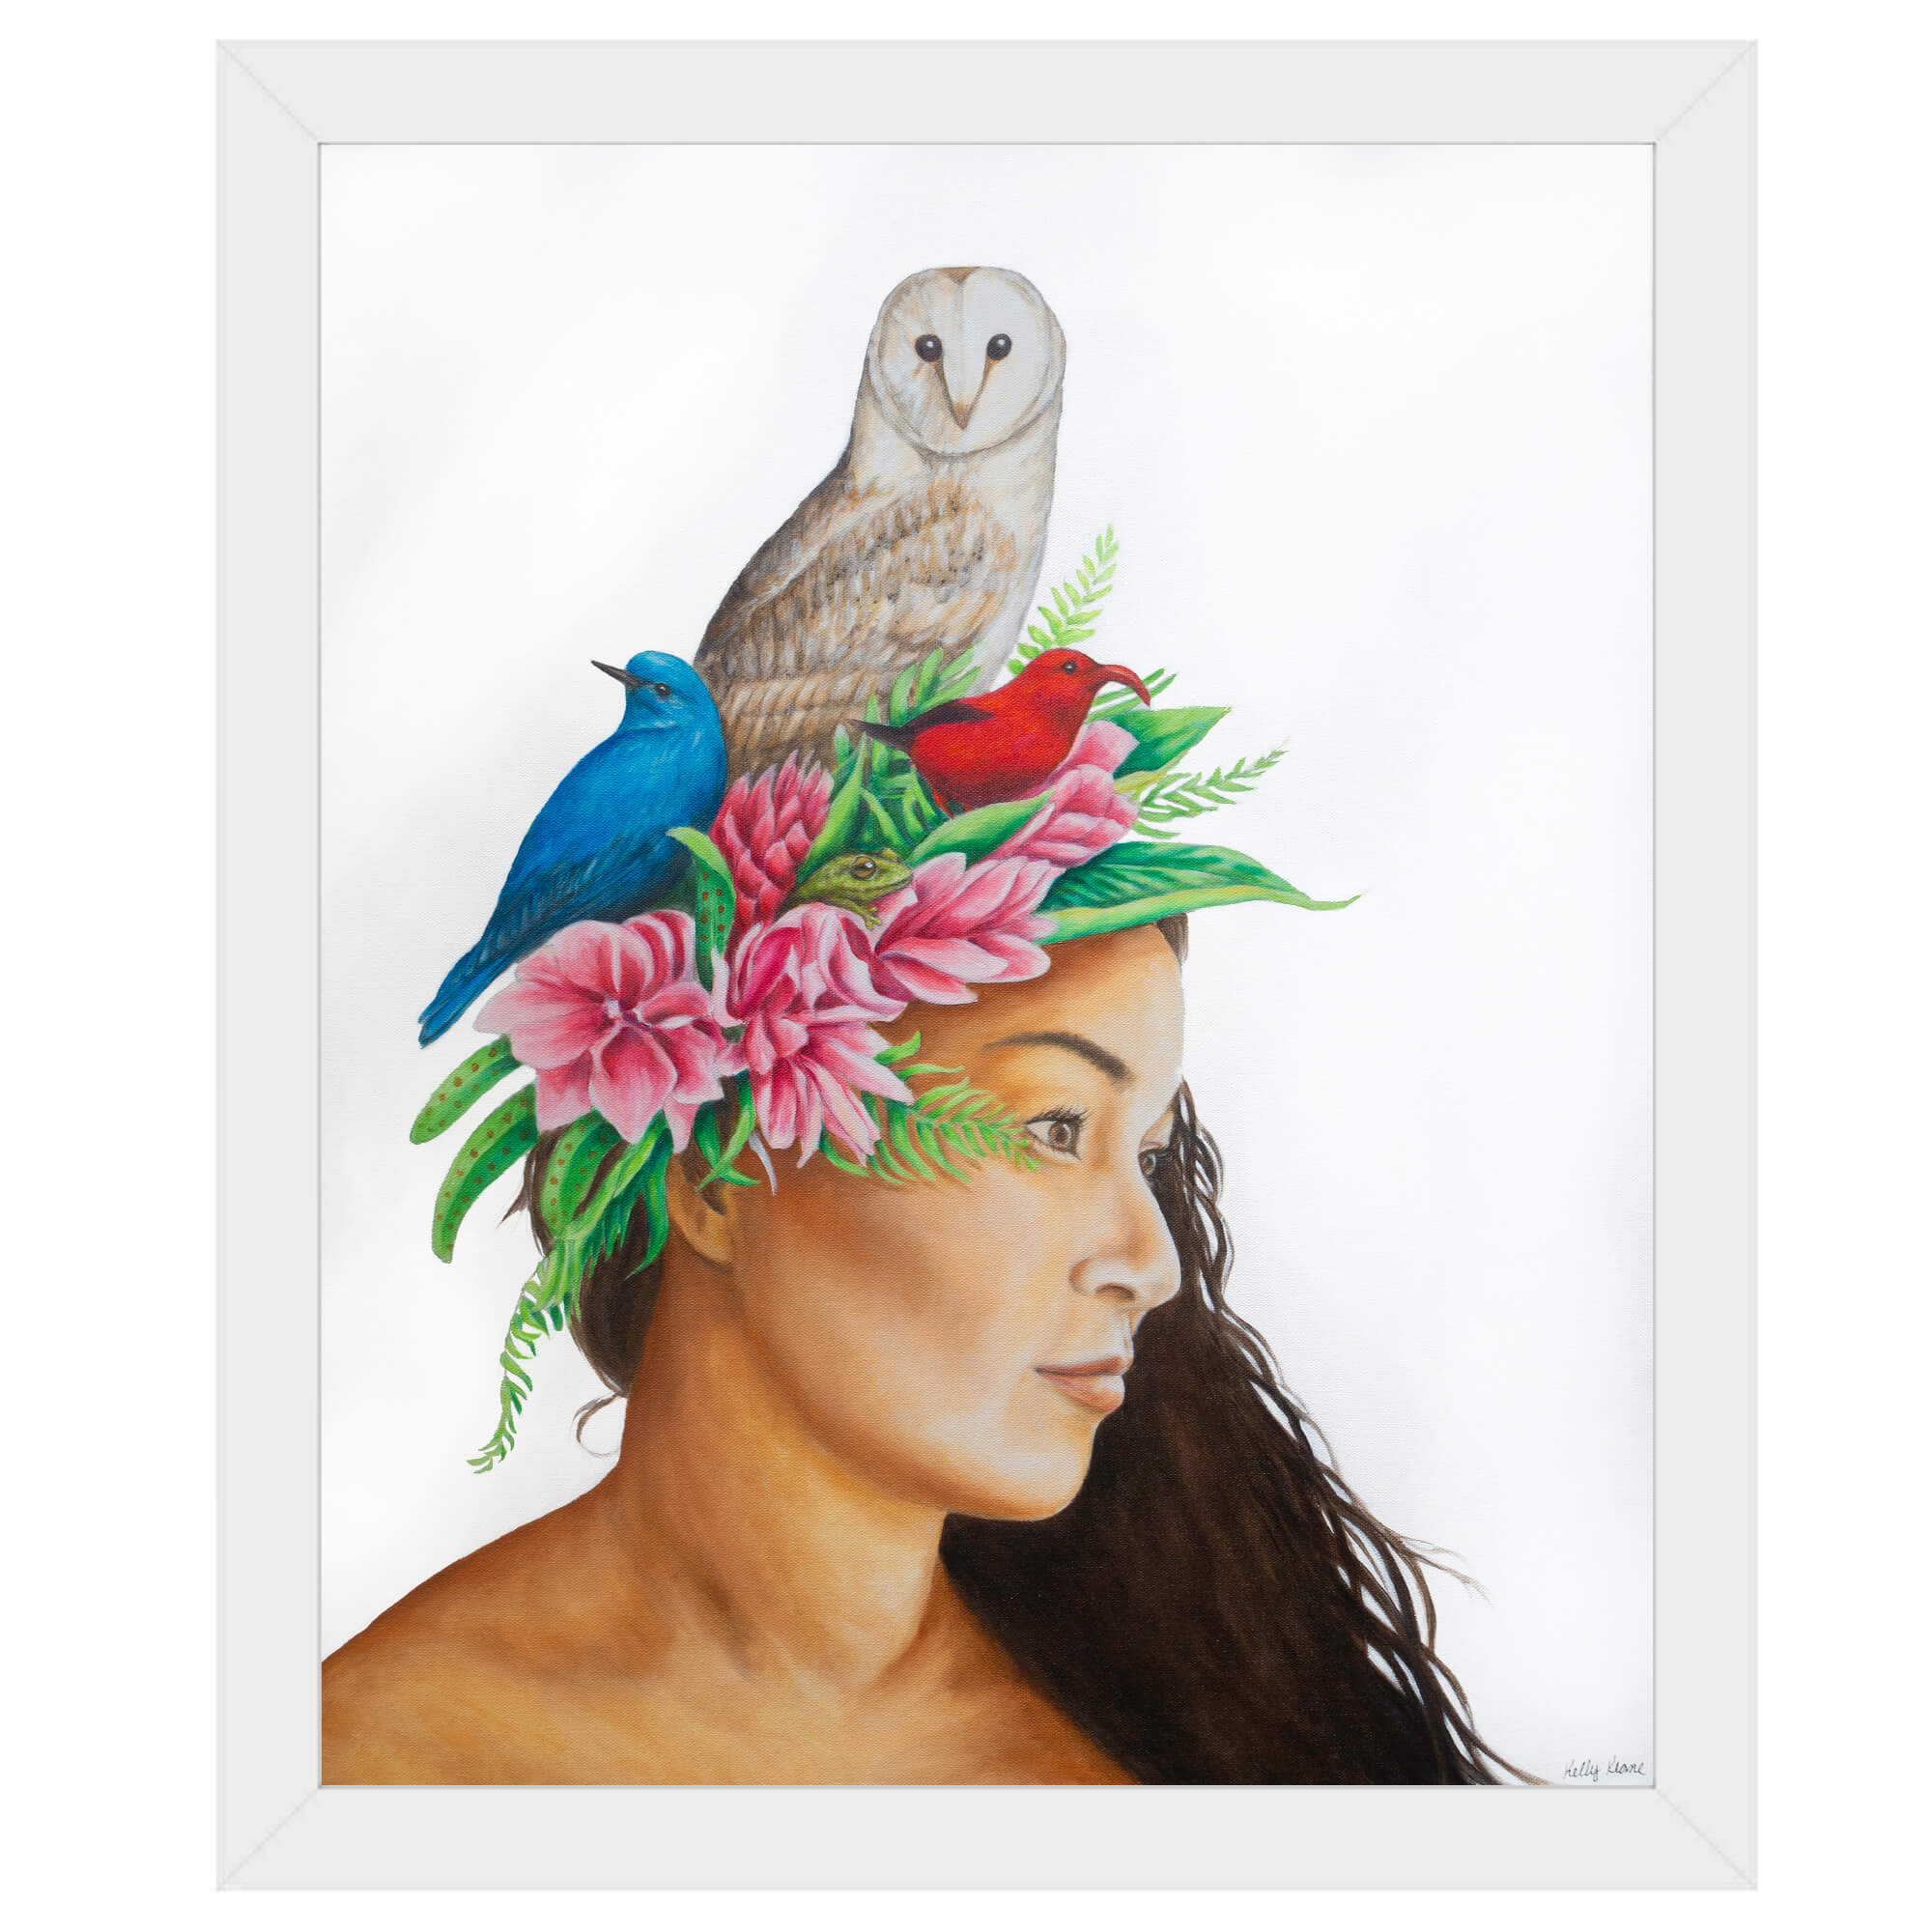 Paper art print of woman with some colorful birds on her head by Hawaii artist Kelly Keane